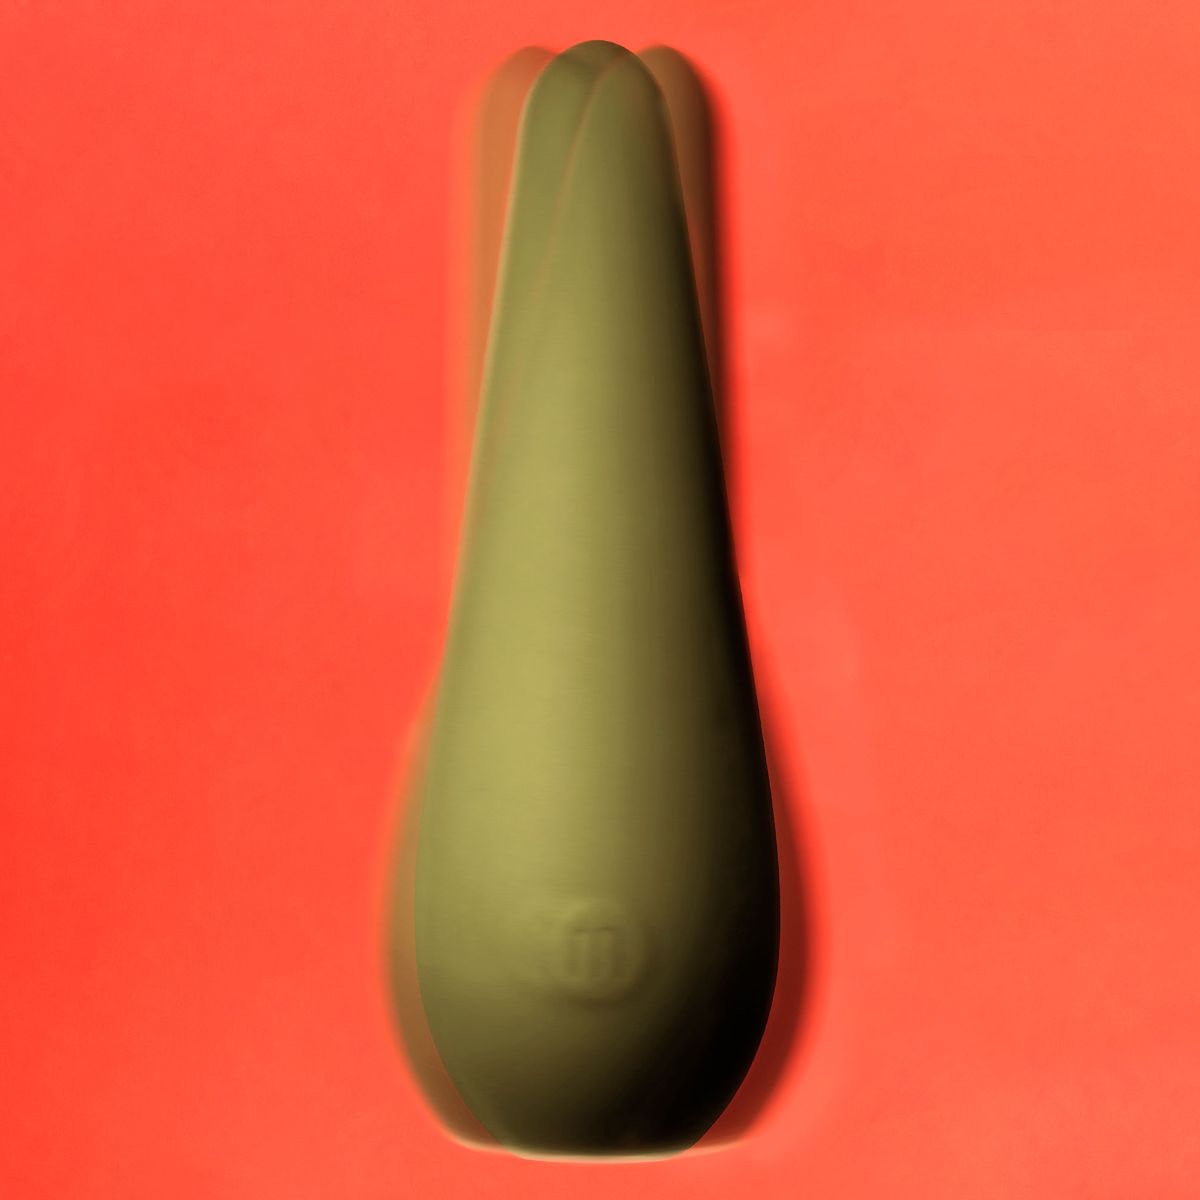 Call Boy Sex In Hotel Room Teen - The Best Luxury Vibrators 2022 | The Strategist